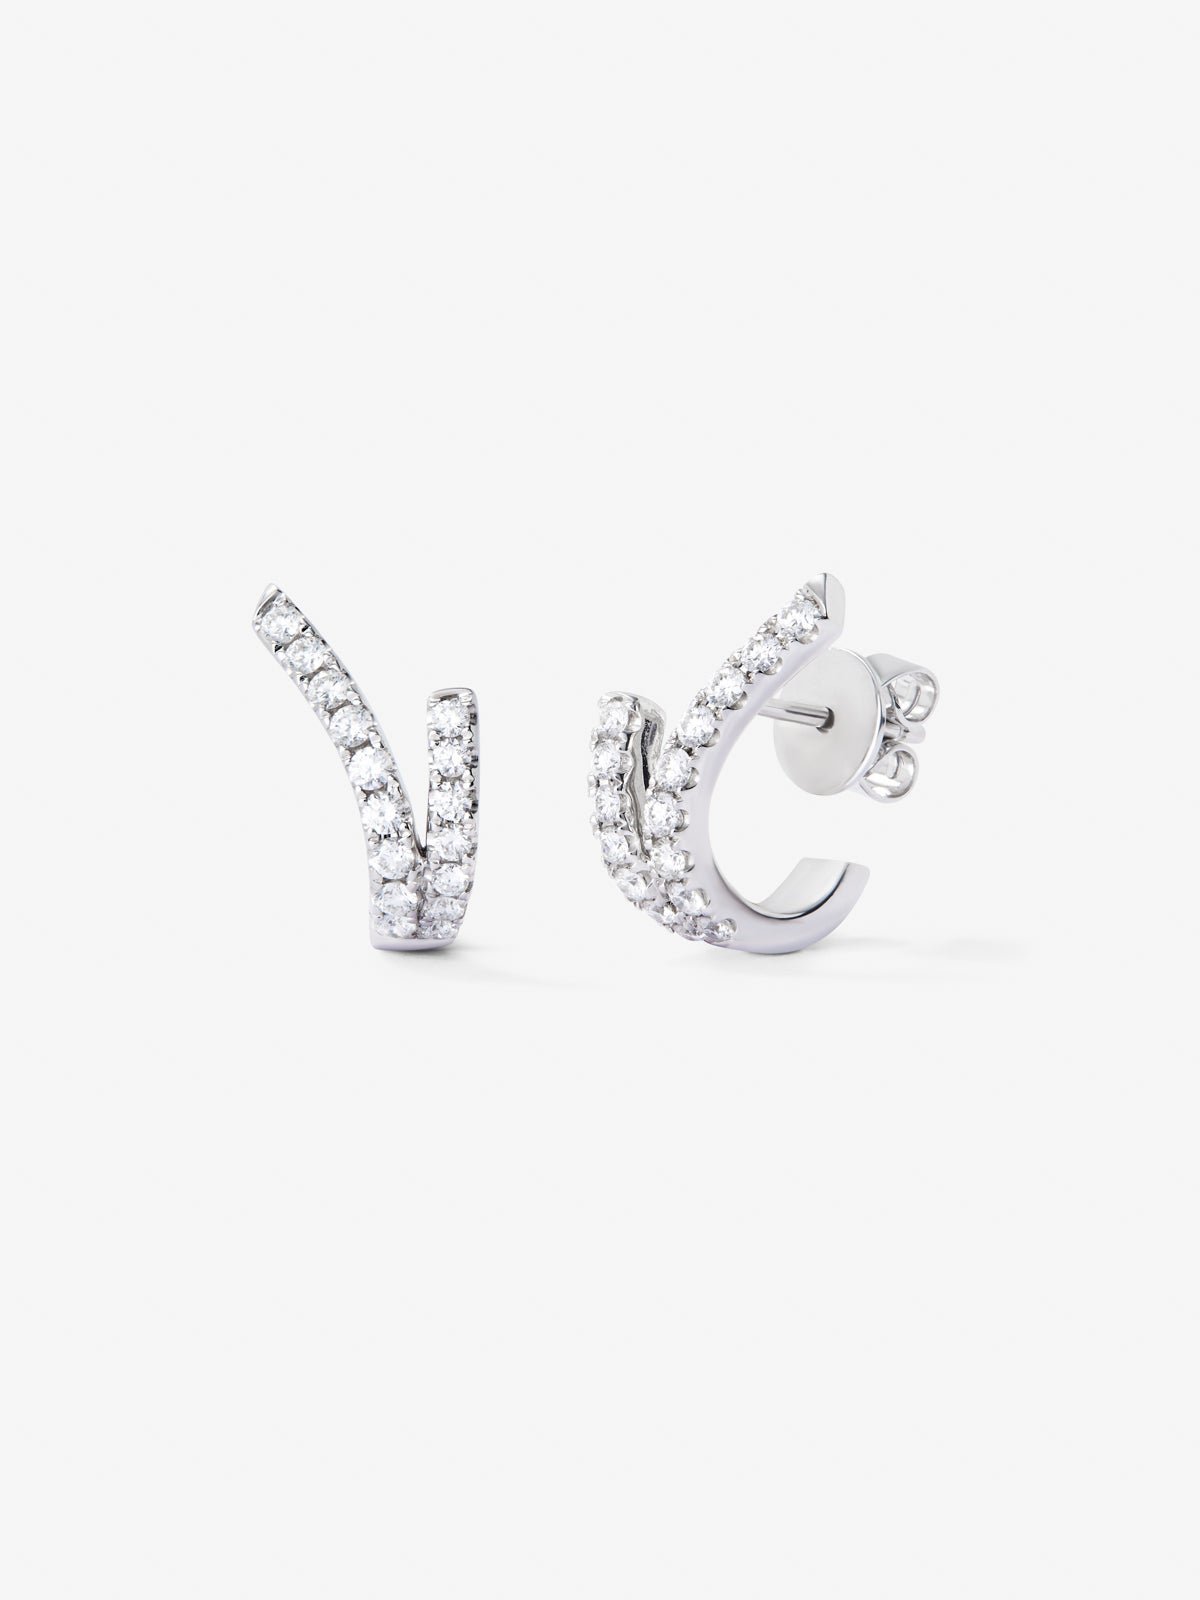 18K white gold earrings with 32 brilliant-cut diamonds with a total of 0.56 cts